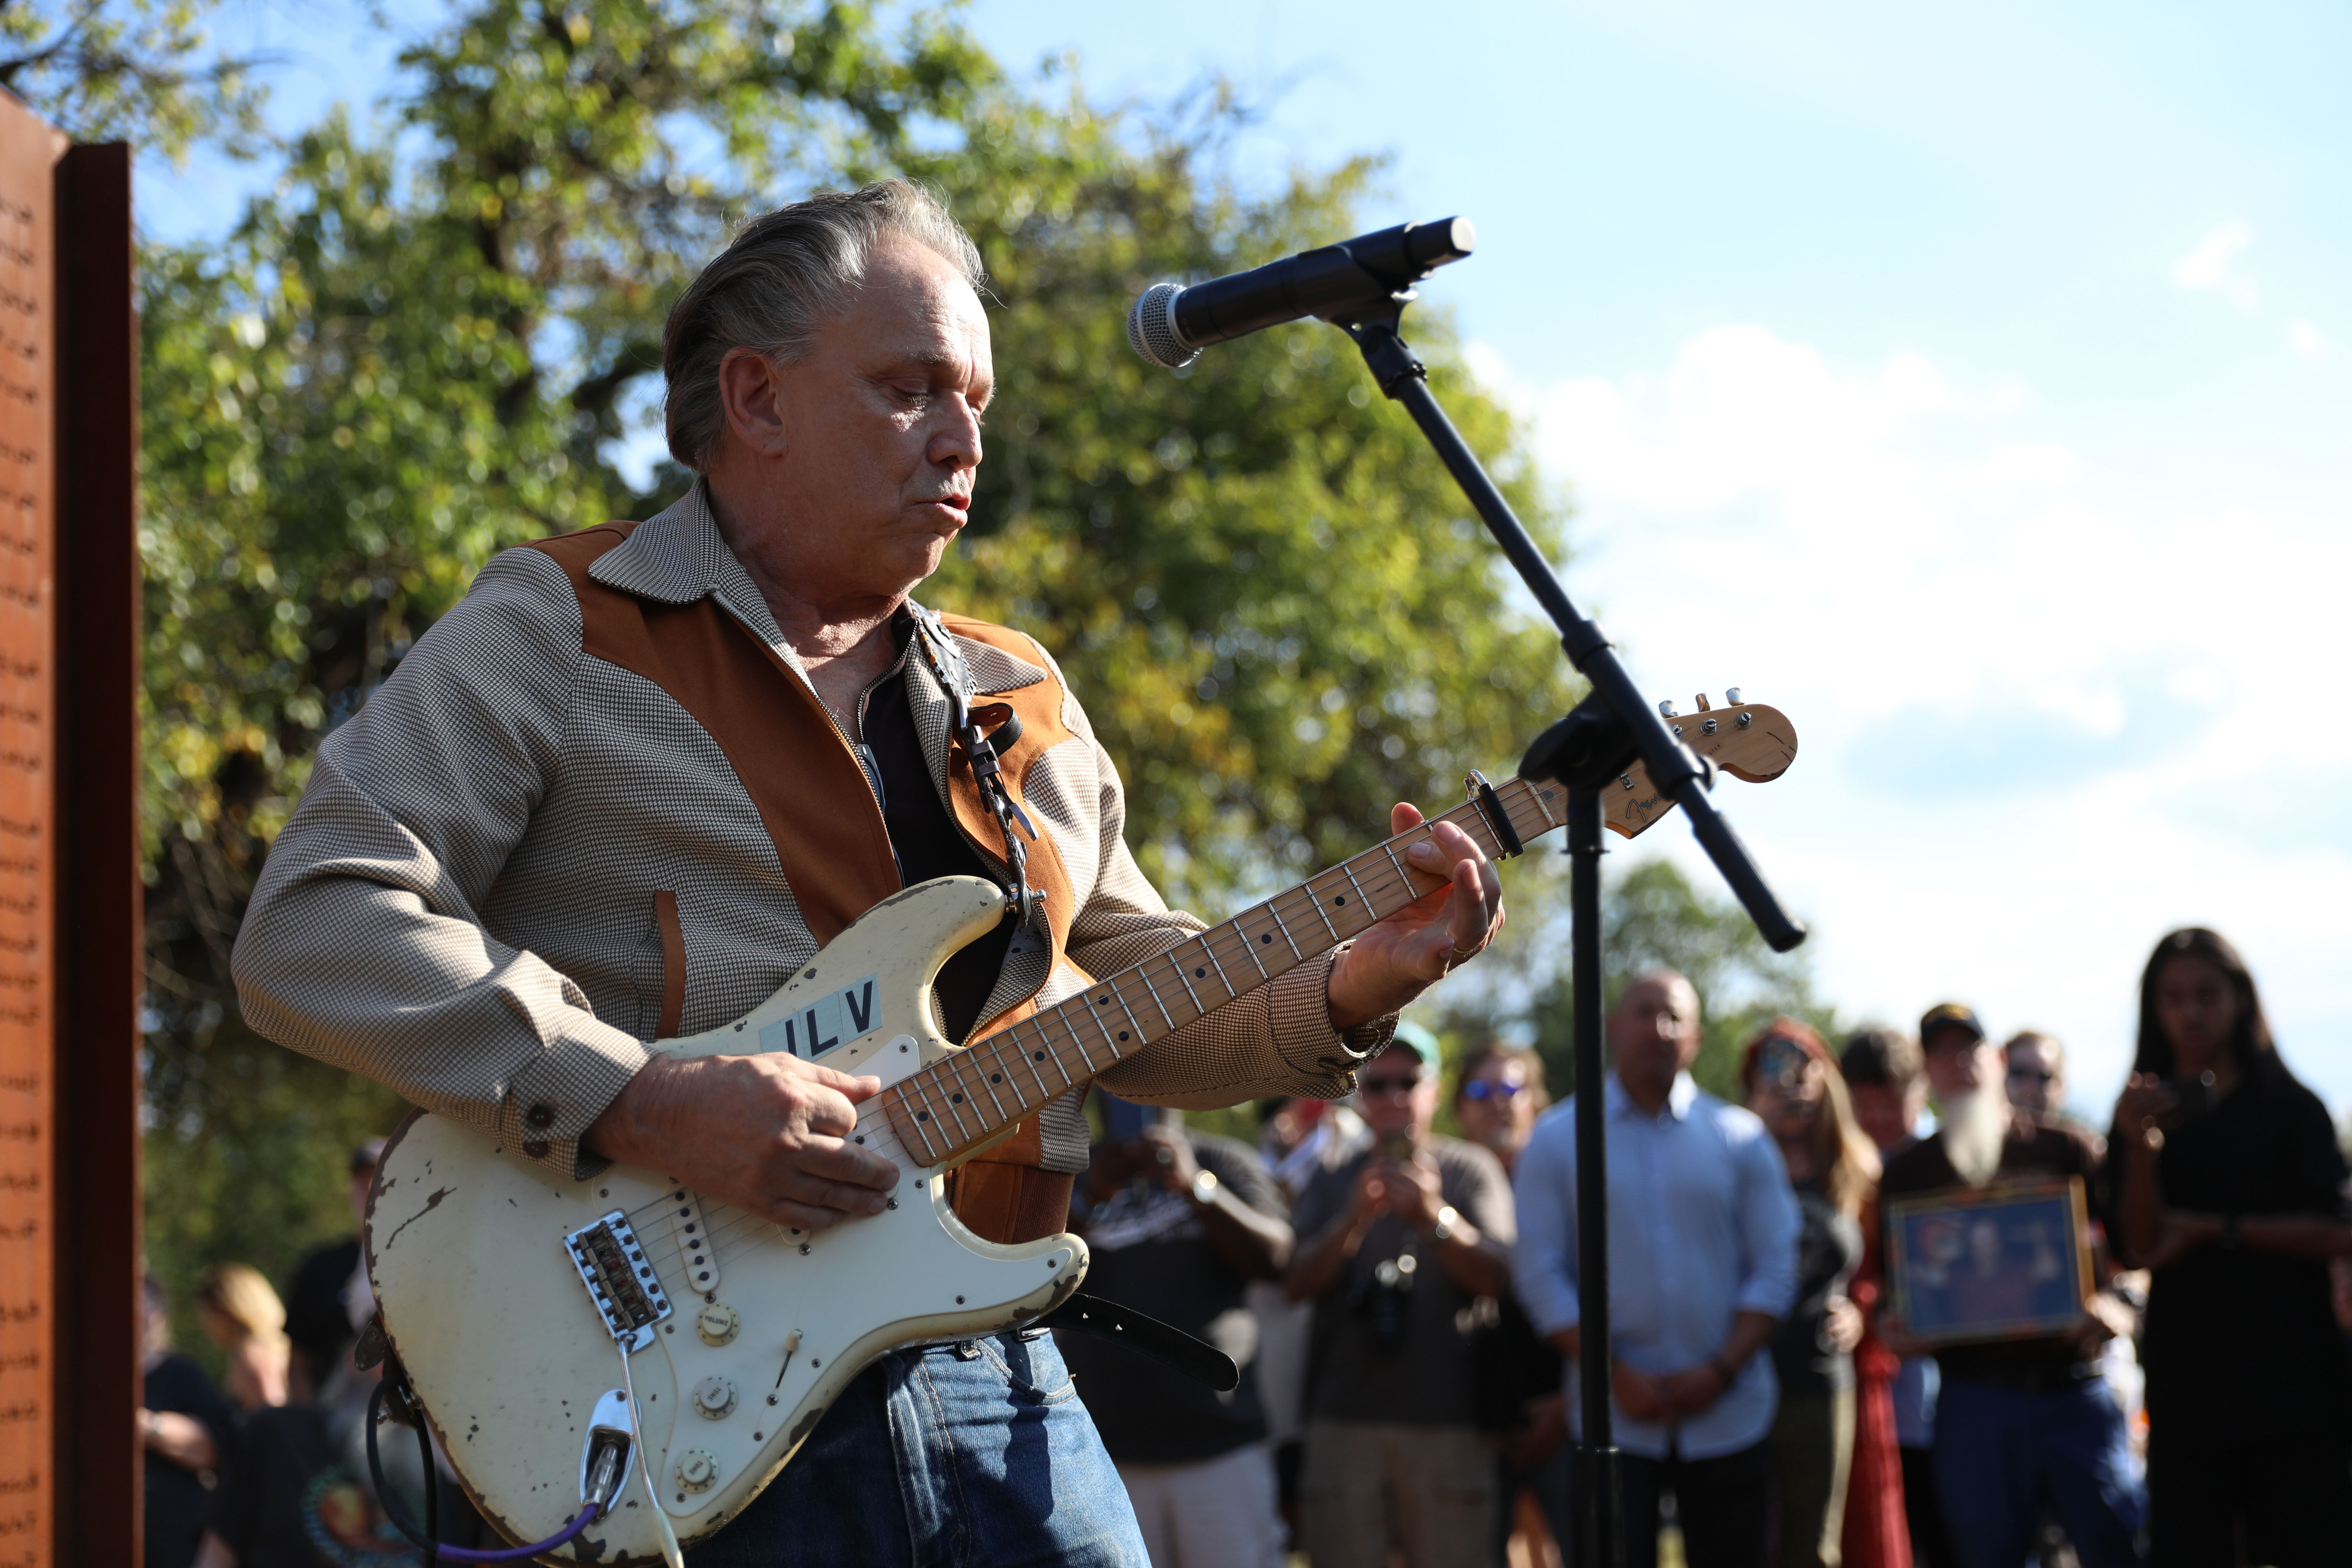 Dallas mayor declares Oct. 3 'Vaughan Brothers Day' as sculpture dedicated  to Stevie Ray, Jimmie